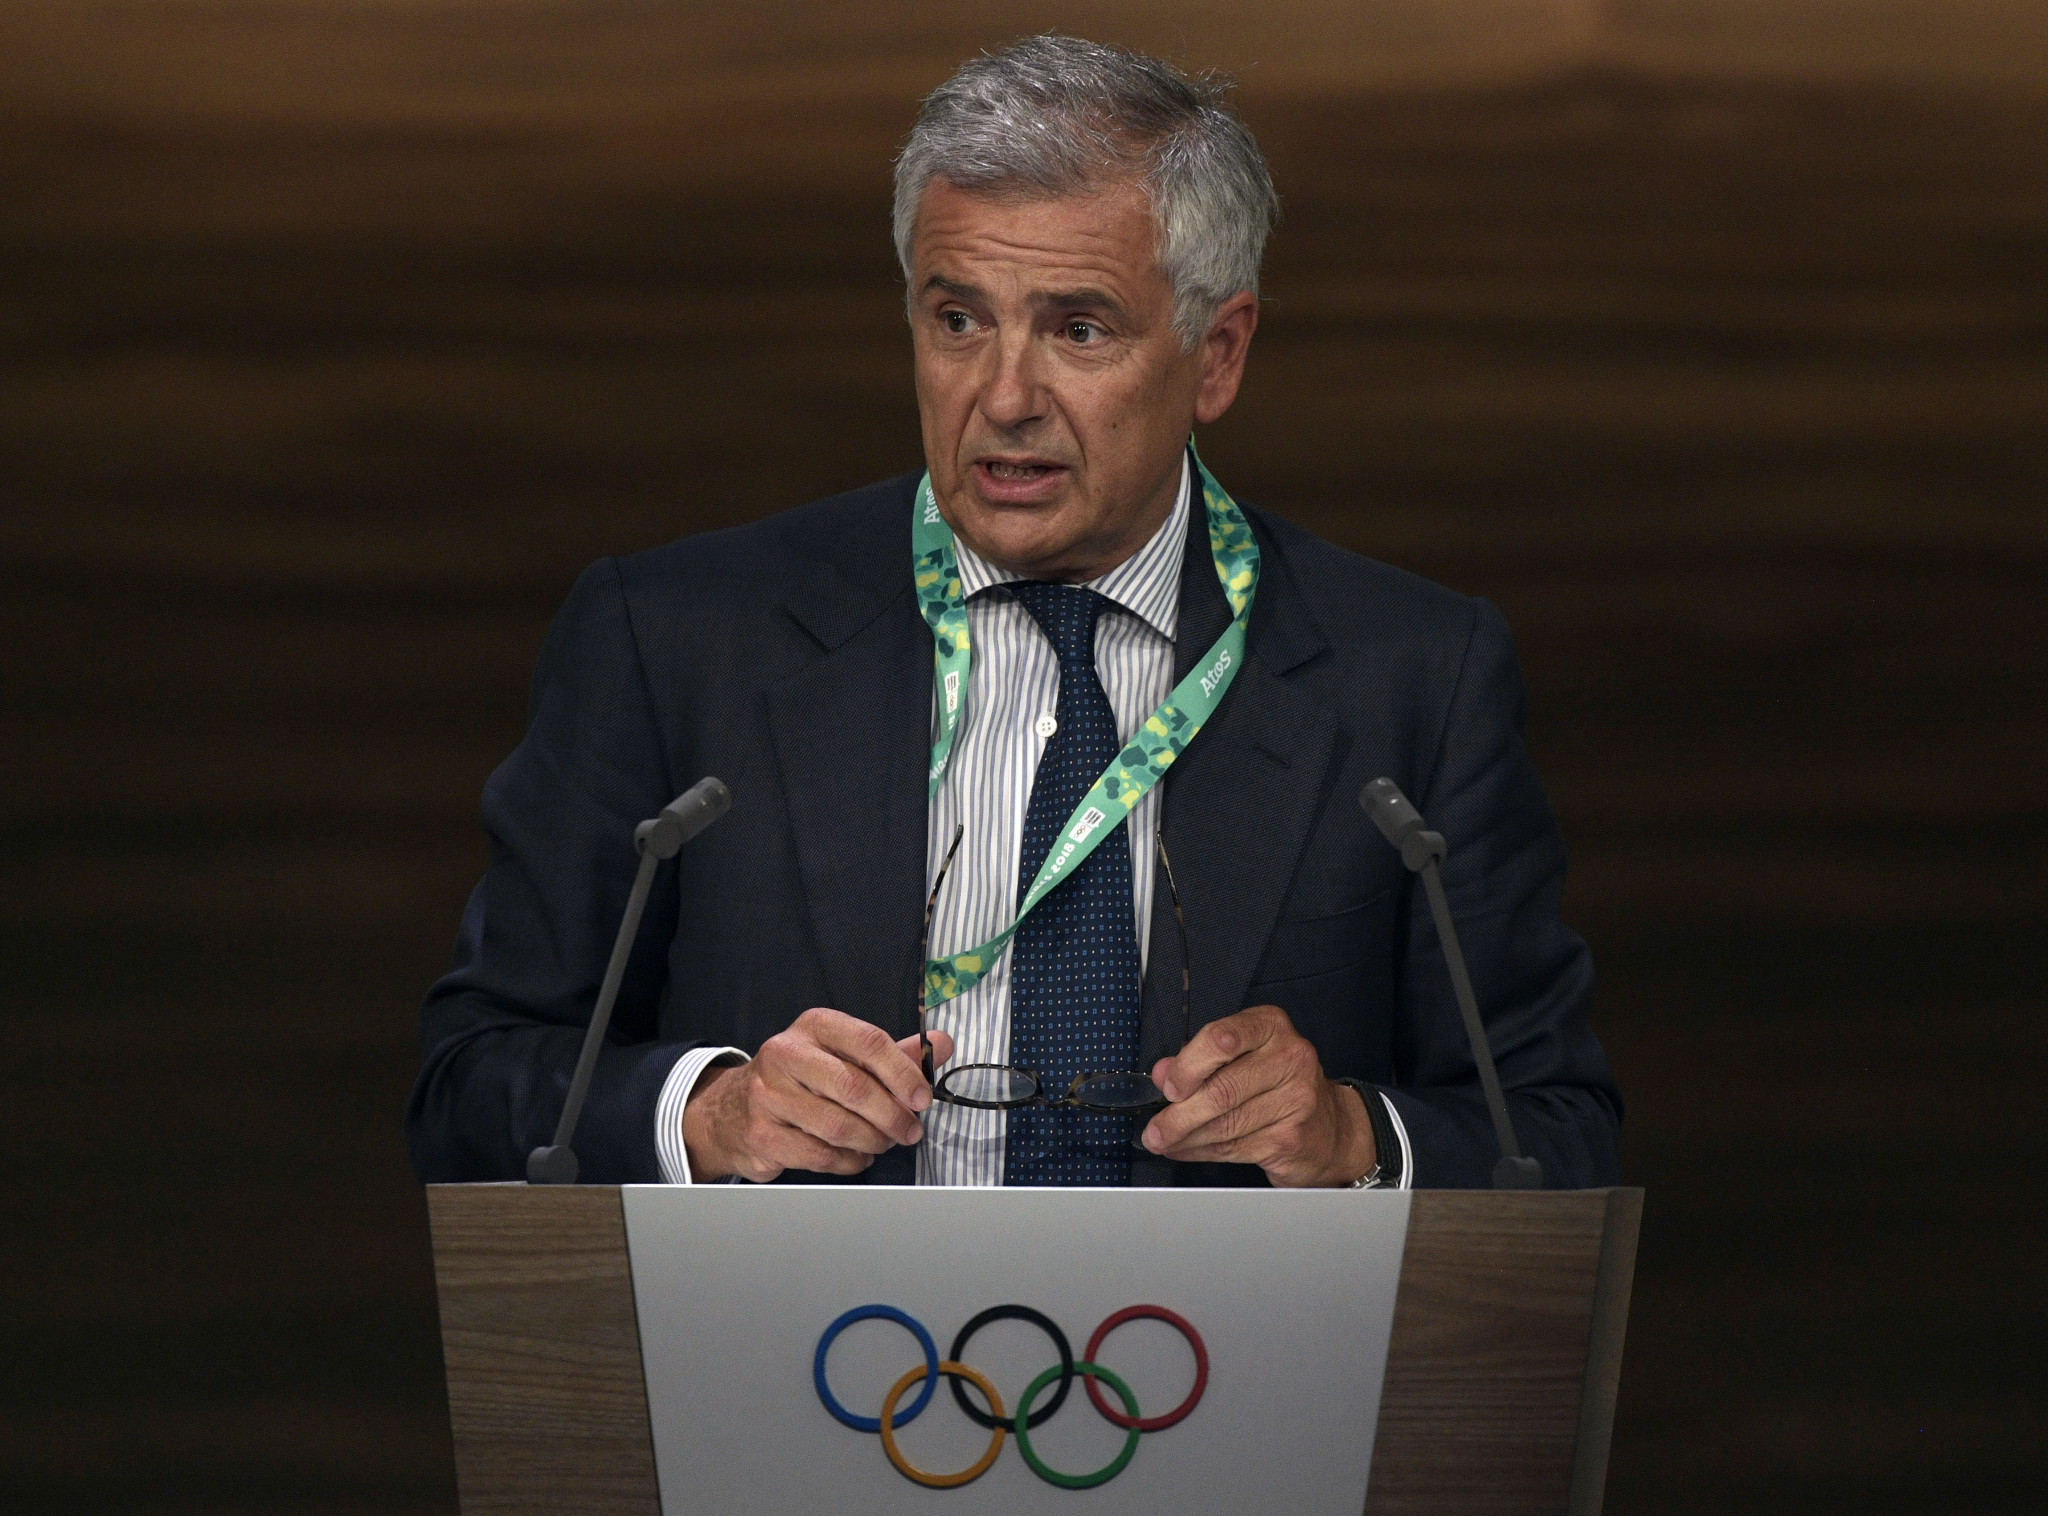 Juan Antonio Samaranch, an IOC vice-president and Coordination Commission chair for Beijing 2022, was among those present at the Project Review ©Getty Images